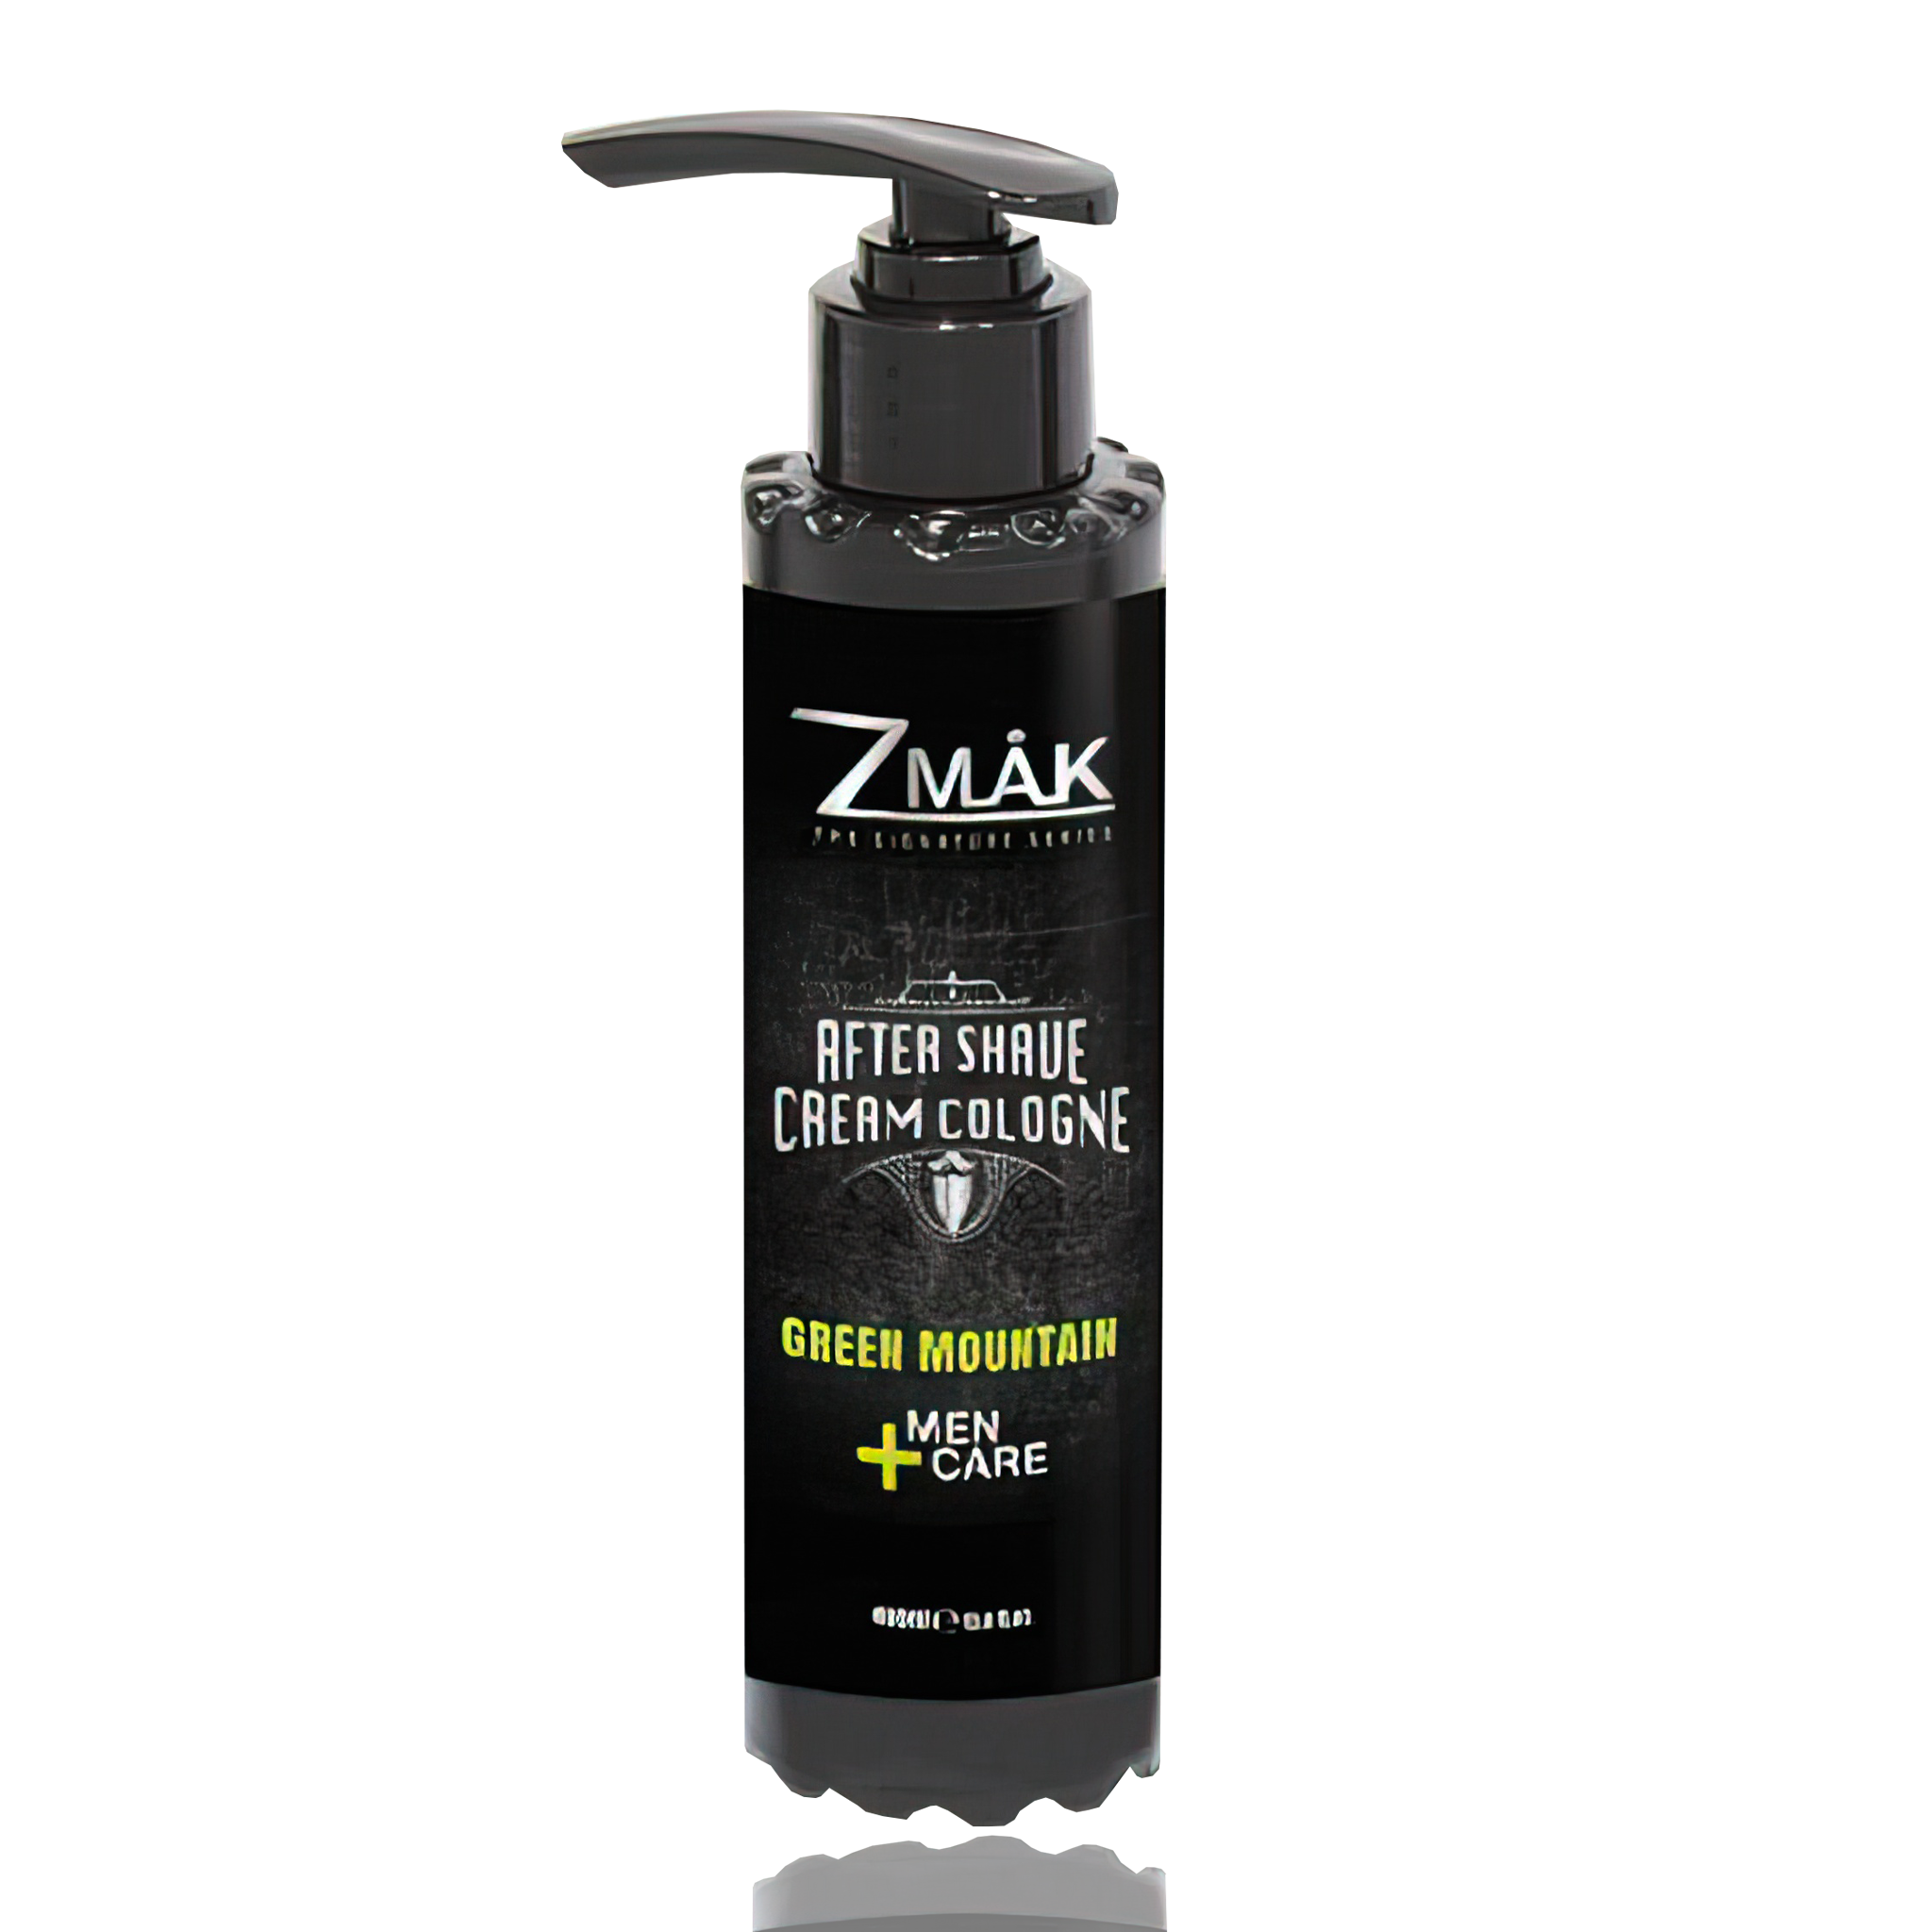 After Shave Cream Cologne - Green Mountain - 13.86 fl oz. - ZMAK The Signature Series